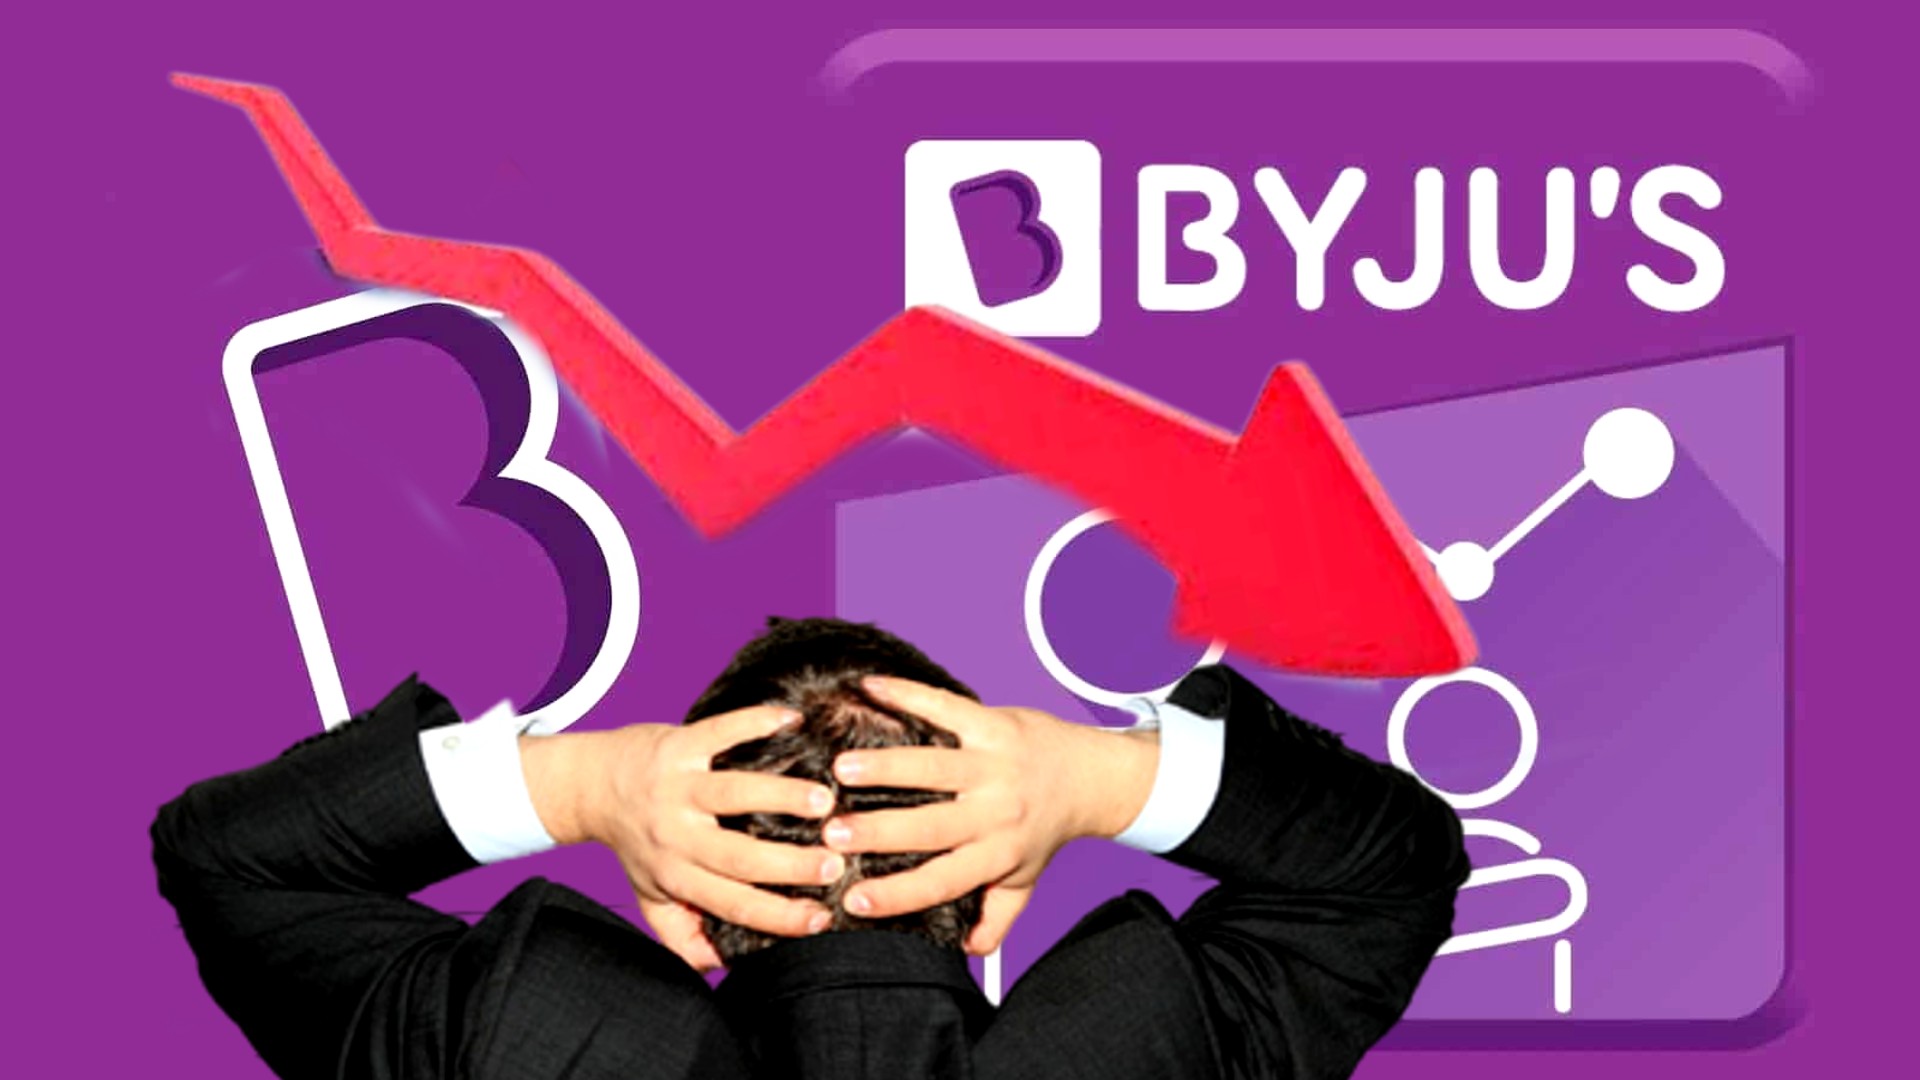 BYJUS acquire Aakash Educational Services 1B deal Merger Latest News   Business News  India TV